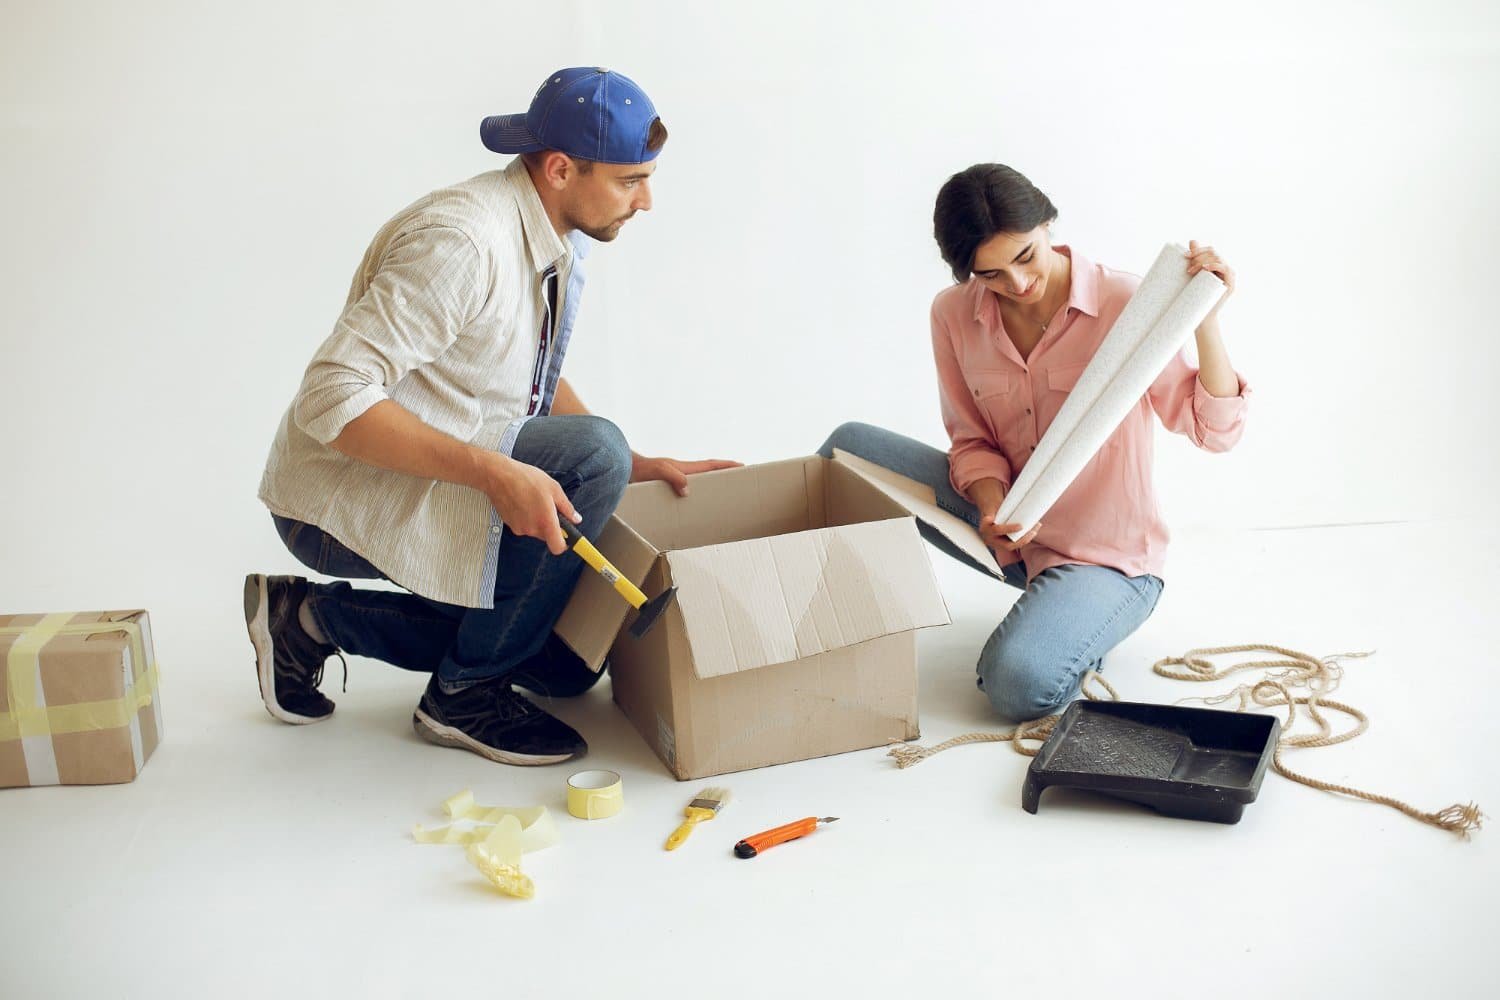 DIY Home Improvement: Tackling Common Household Projects